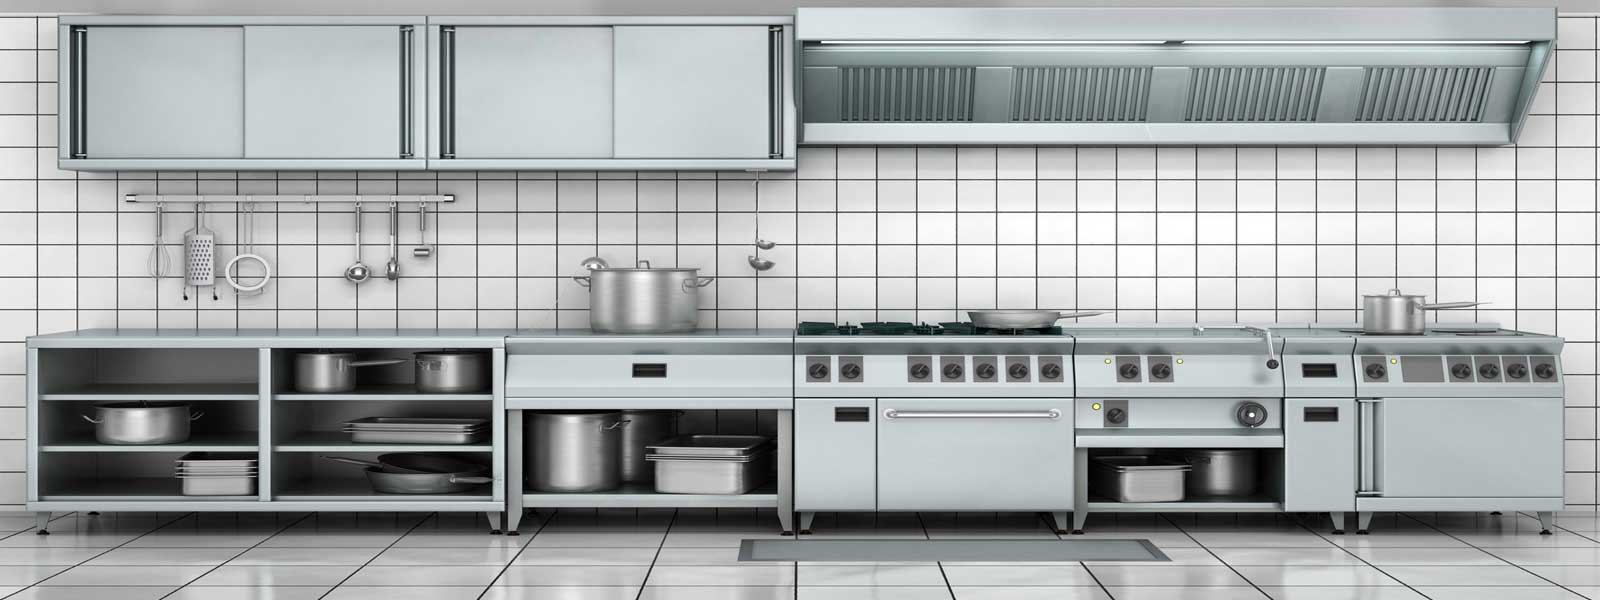 Commercial Kitchen Equipments Manufacturers in Bangalore   Hotel ...